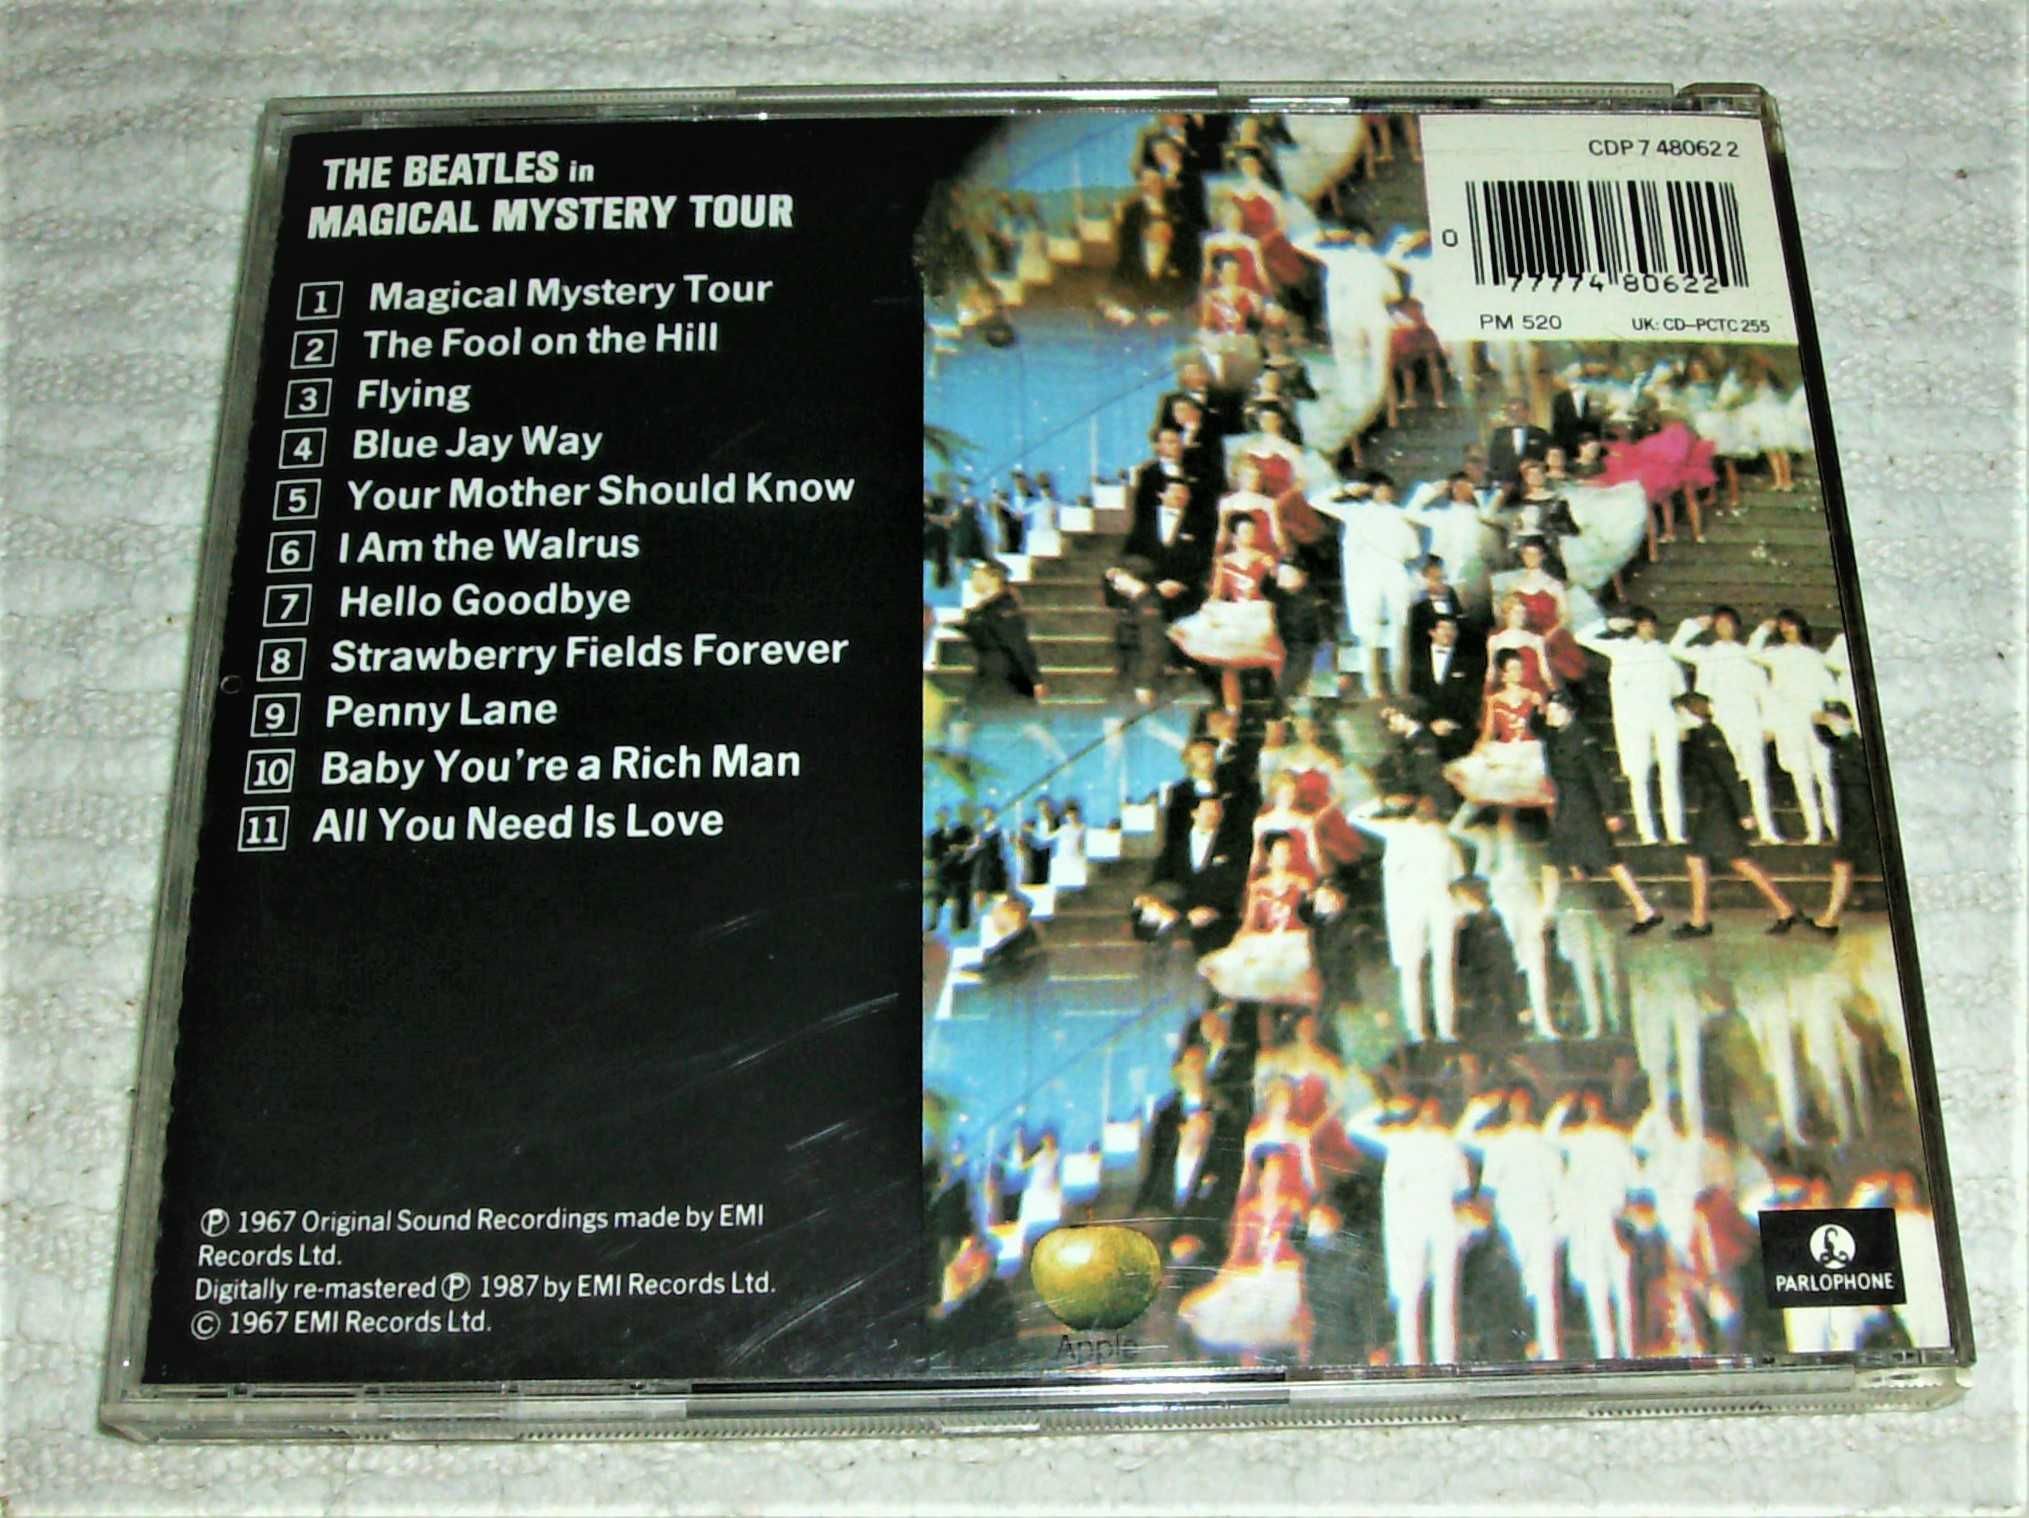 THE BEATLES - MAGICAL MYSTERY TOUR (CD)